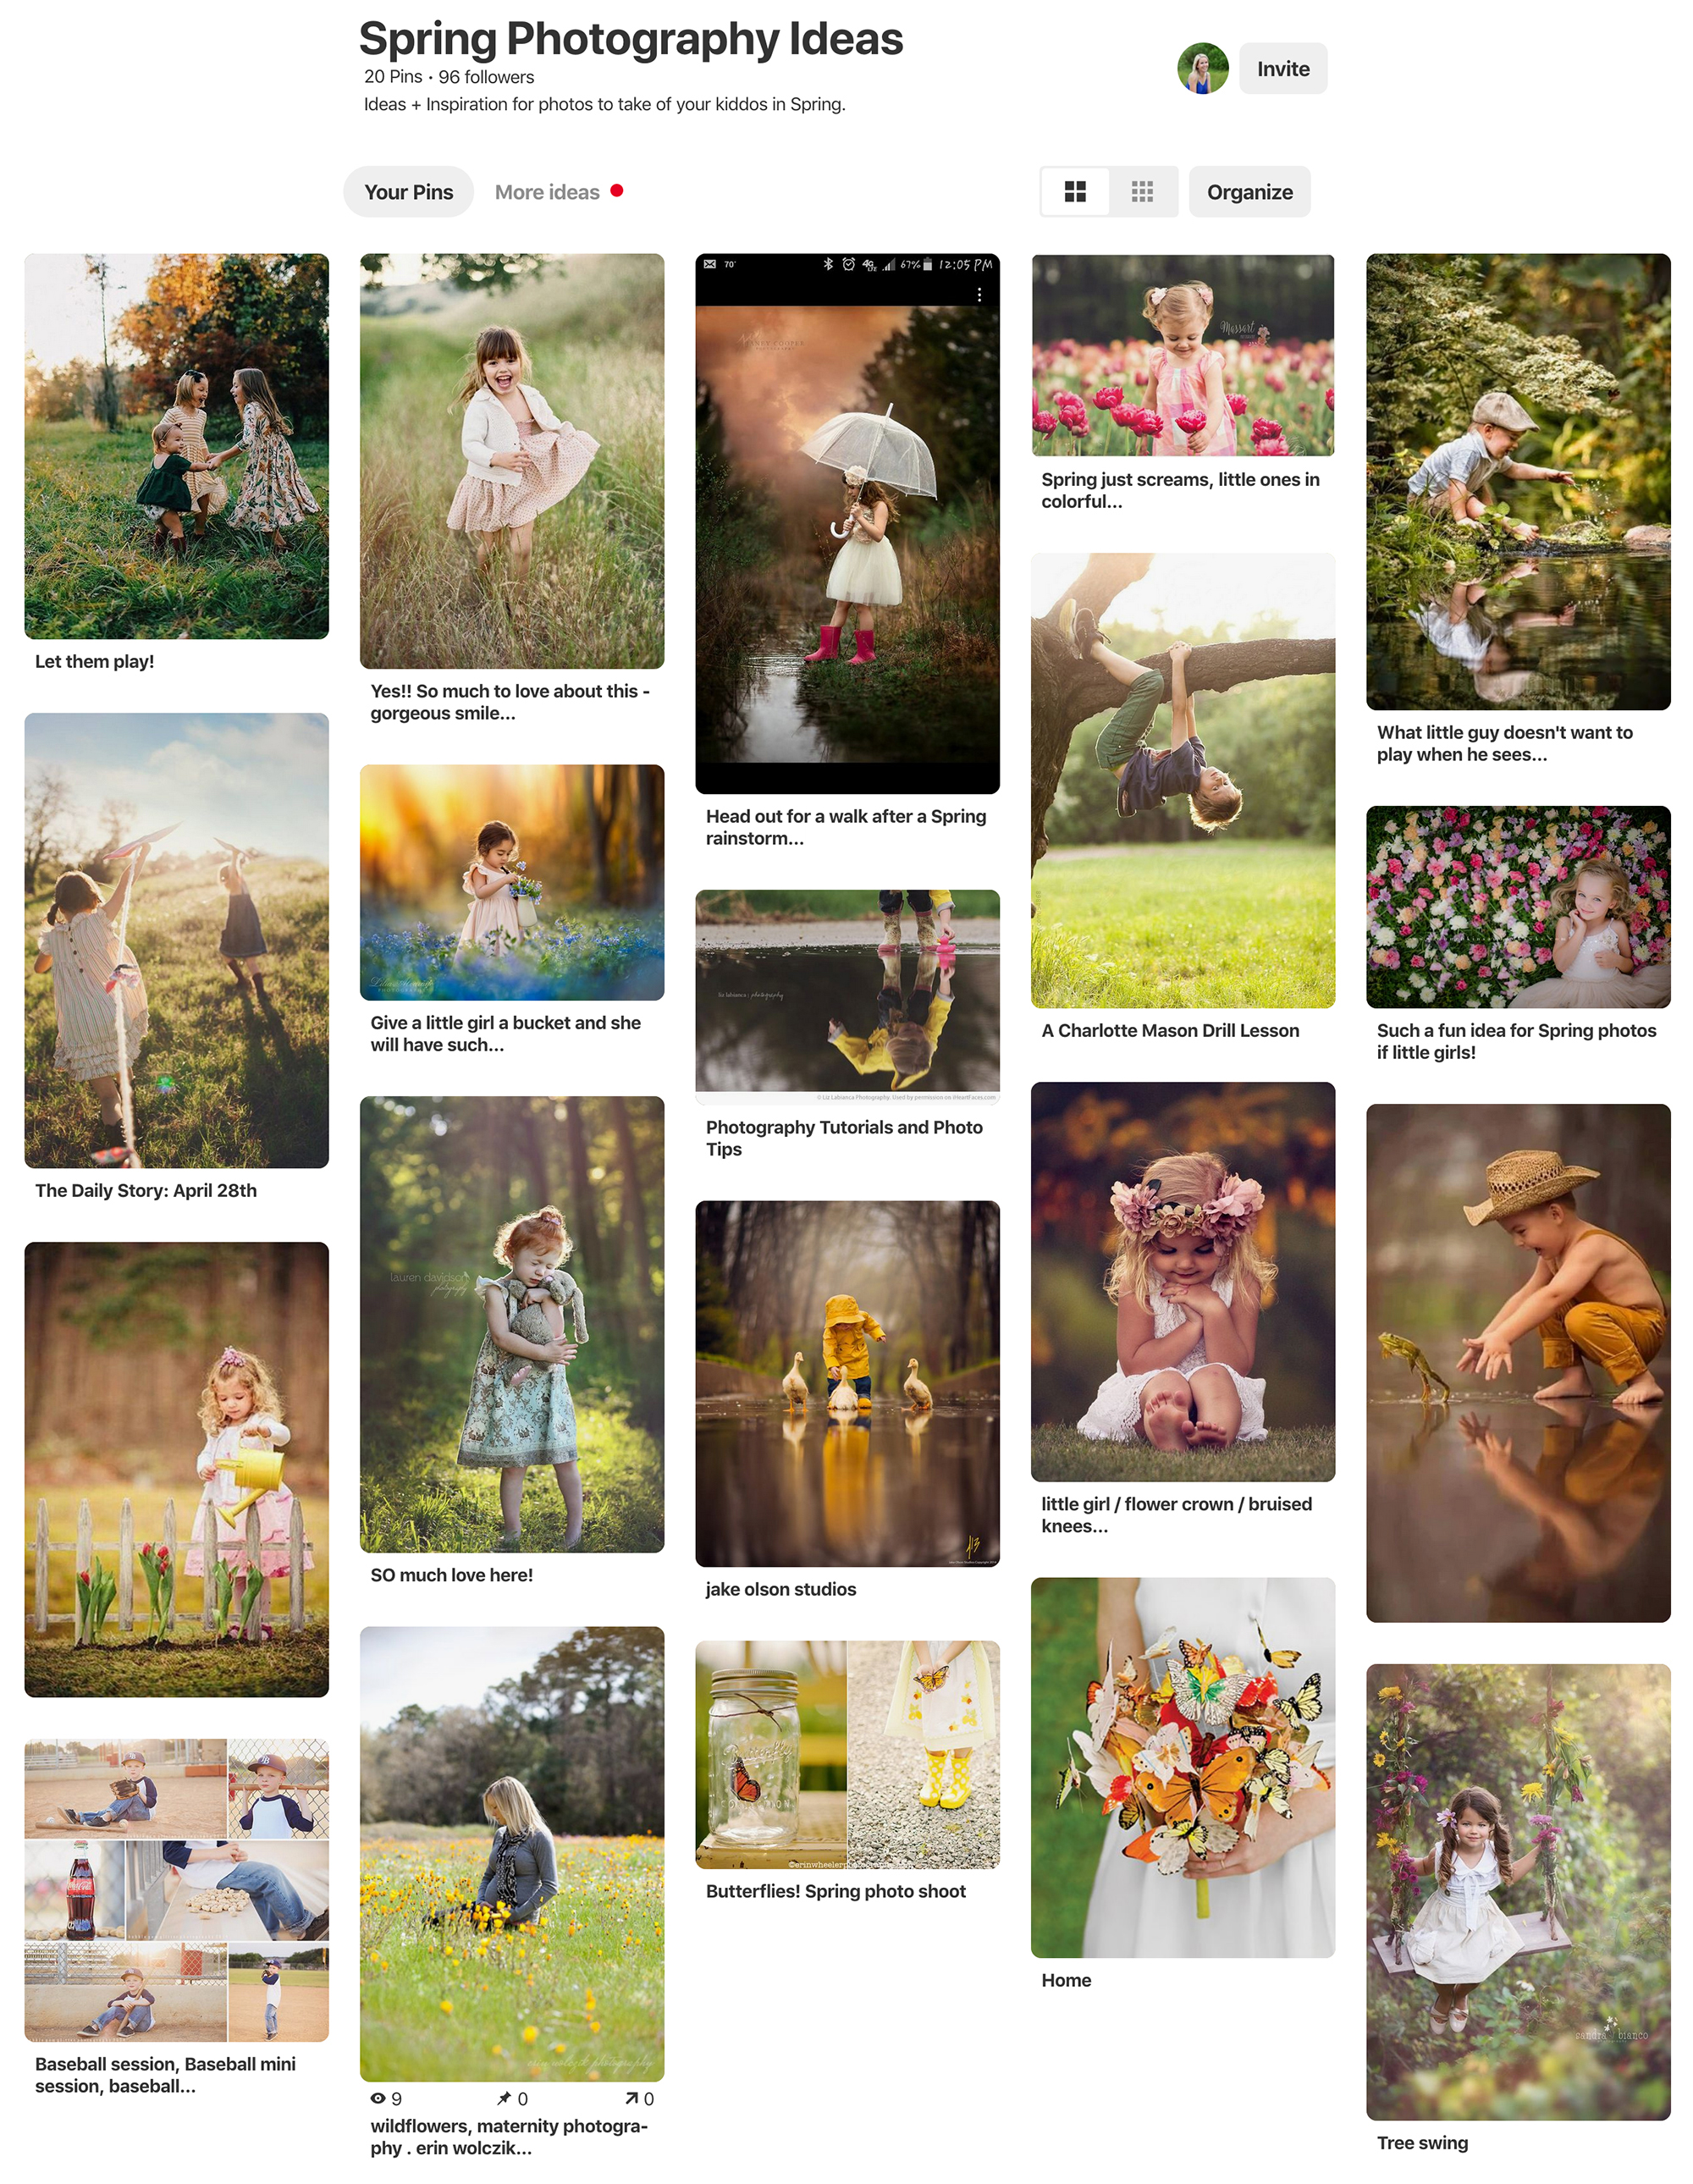 The Best Photos to Take of Your Kids This Spring Pinterest Erin Wolczik